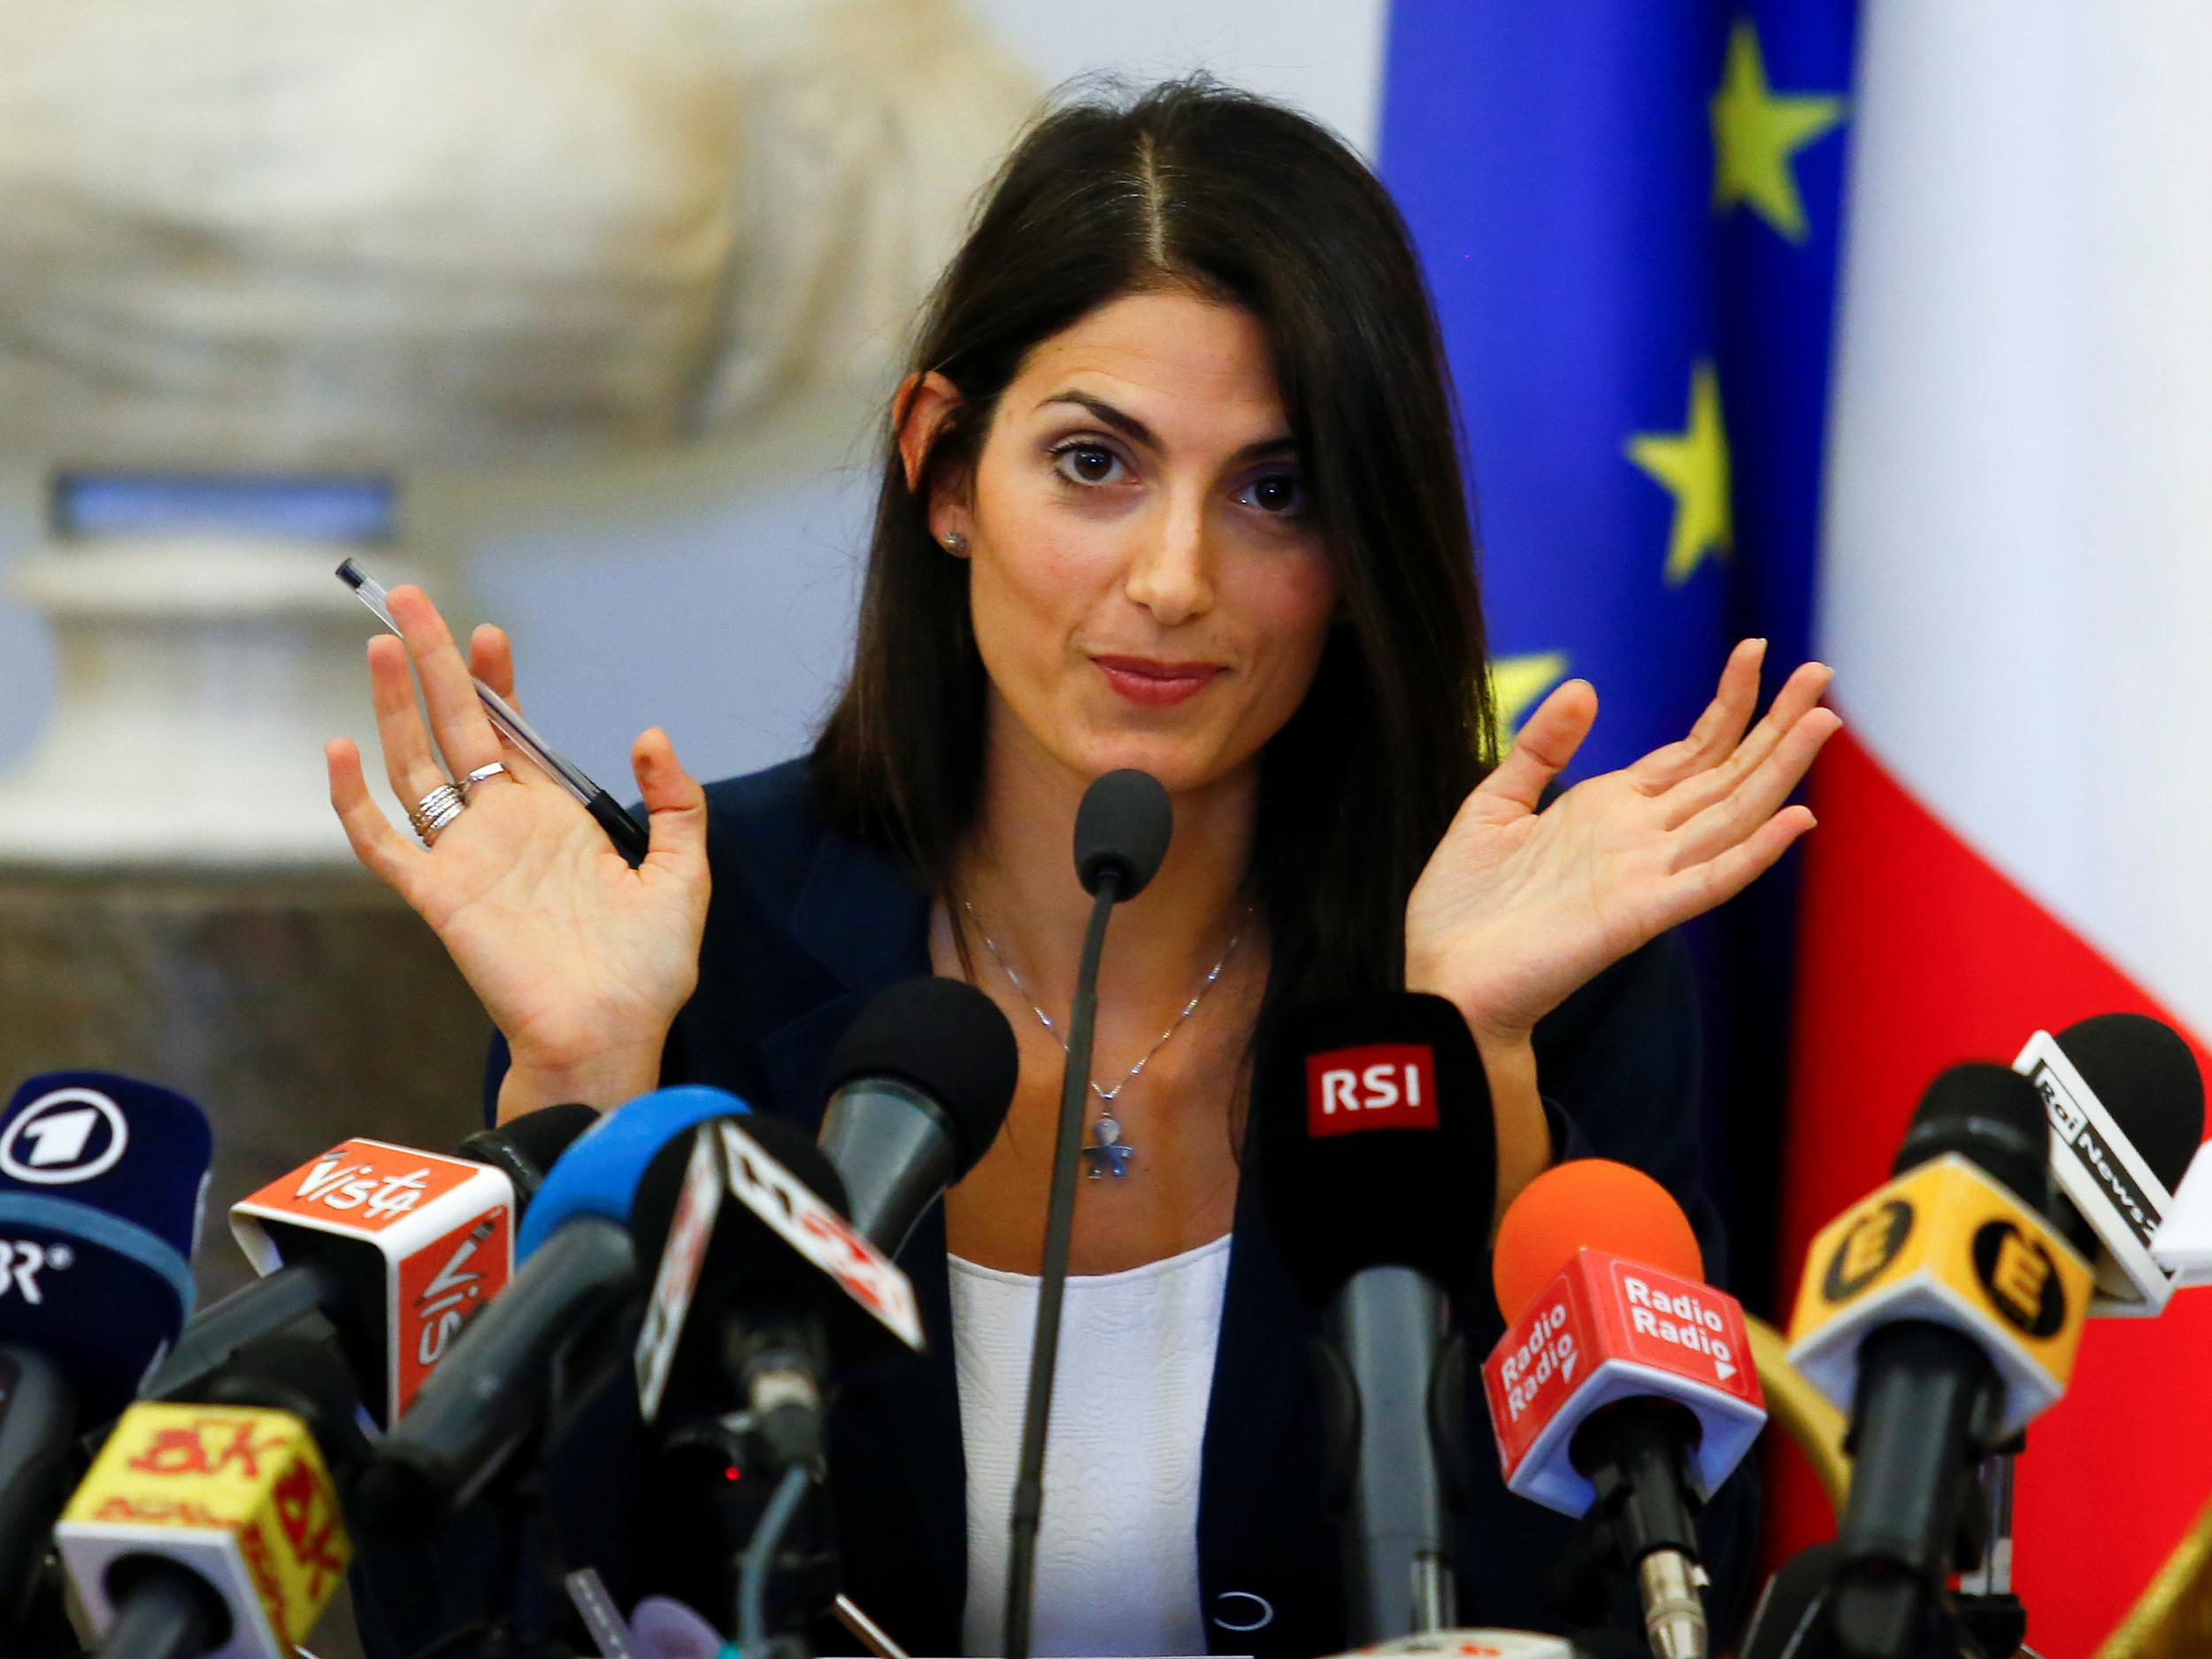 Virginia Raggi, Rome's new mayor, at a press conference on Wednesday